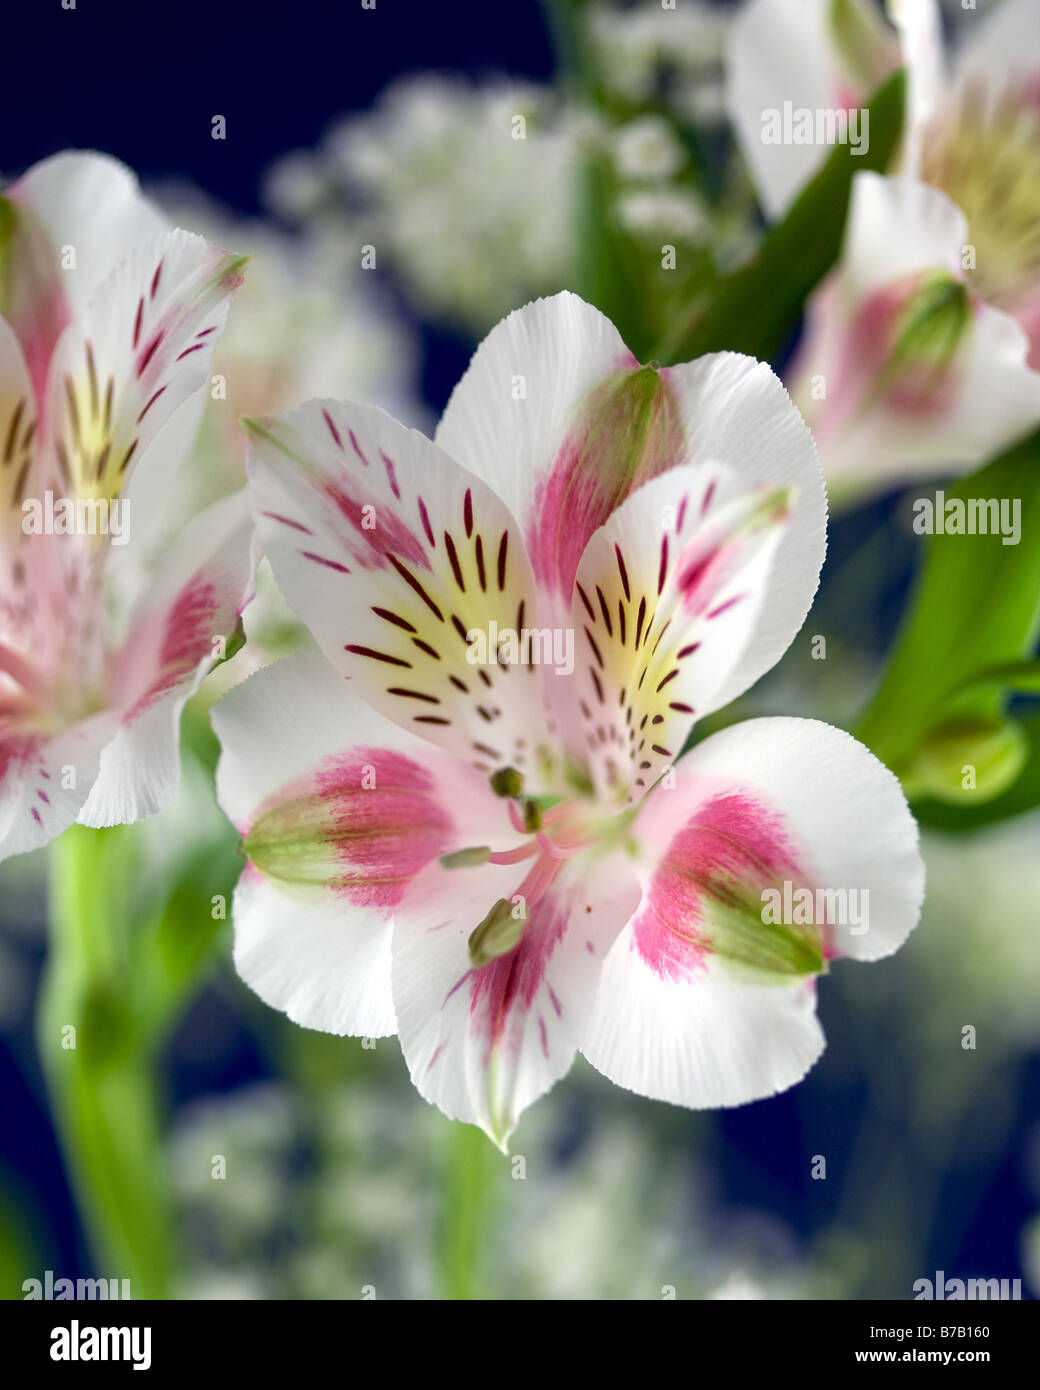 Pink Tiger Lilly Flower Against Blue Background Stock Photo